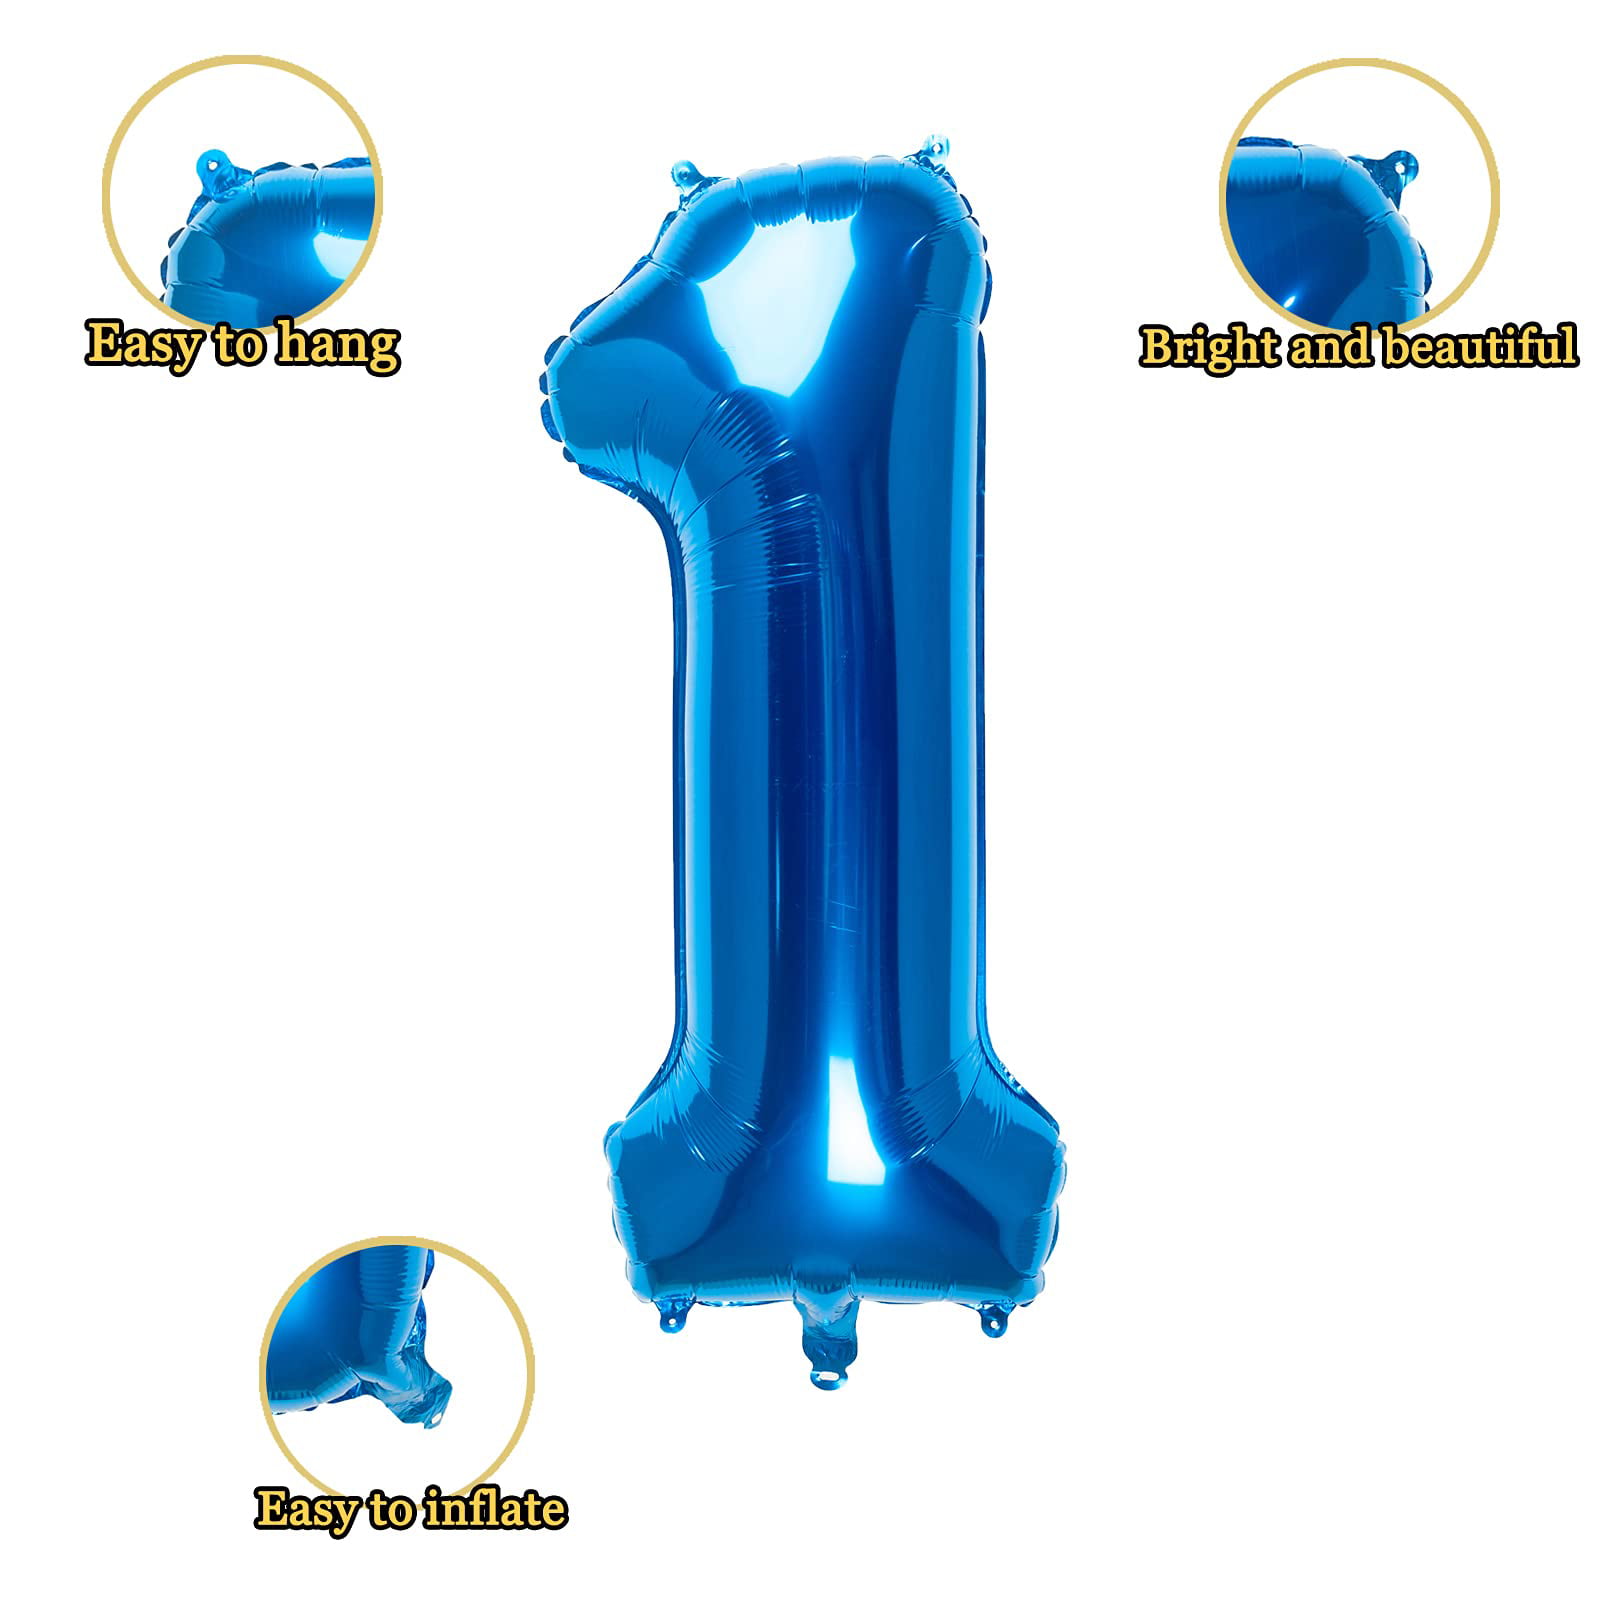 32 Inch Blue Number 1 Balloons Foil Ballon Digital Birthday Party Decoration Supplies (Blue Number 1 Balloon)